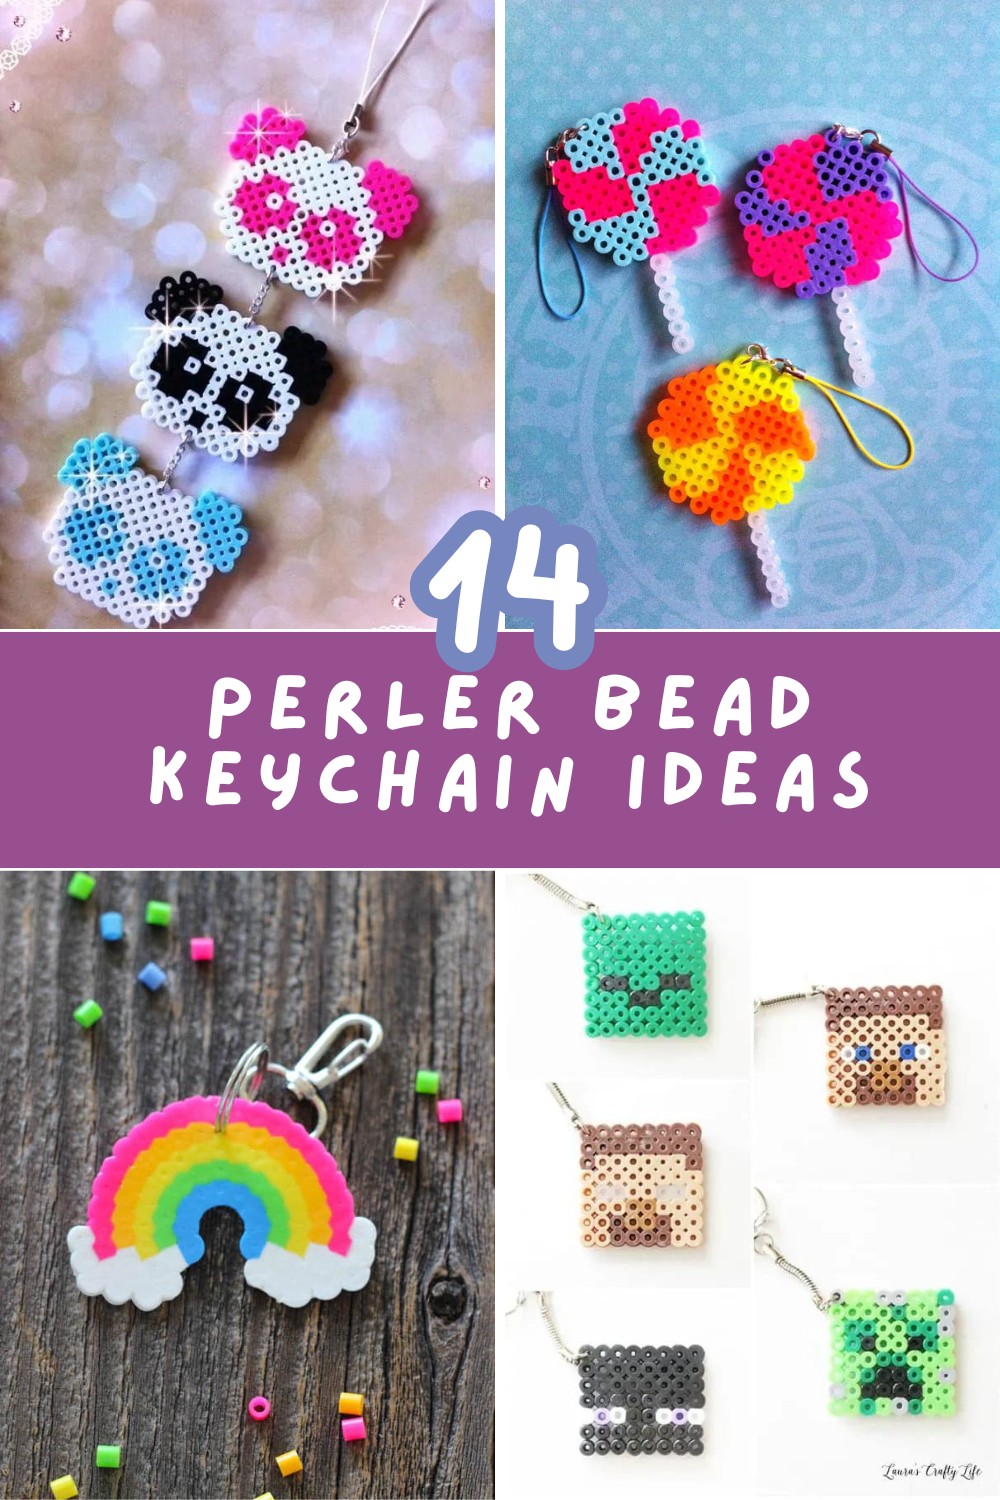 Spruce up your school supplies with these fun Perler bead keychains! 🎒🎨 Perfect for personalizing backpacks and sharing with friends. Dive into this creative back-to-school craft and make something uniquely yours. #BackToSchoolDIY #PerlerBeads #CraftingFun


